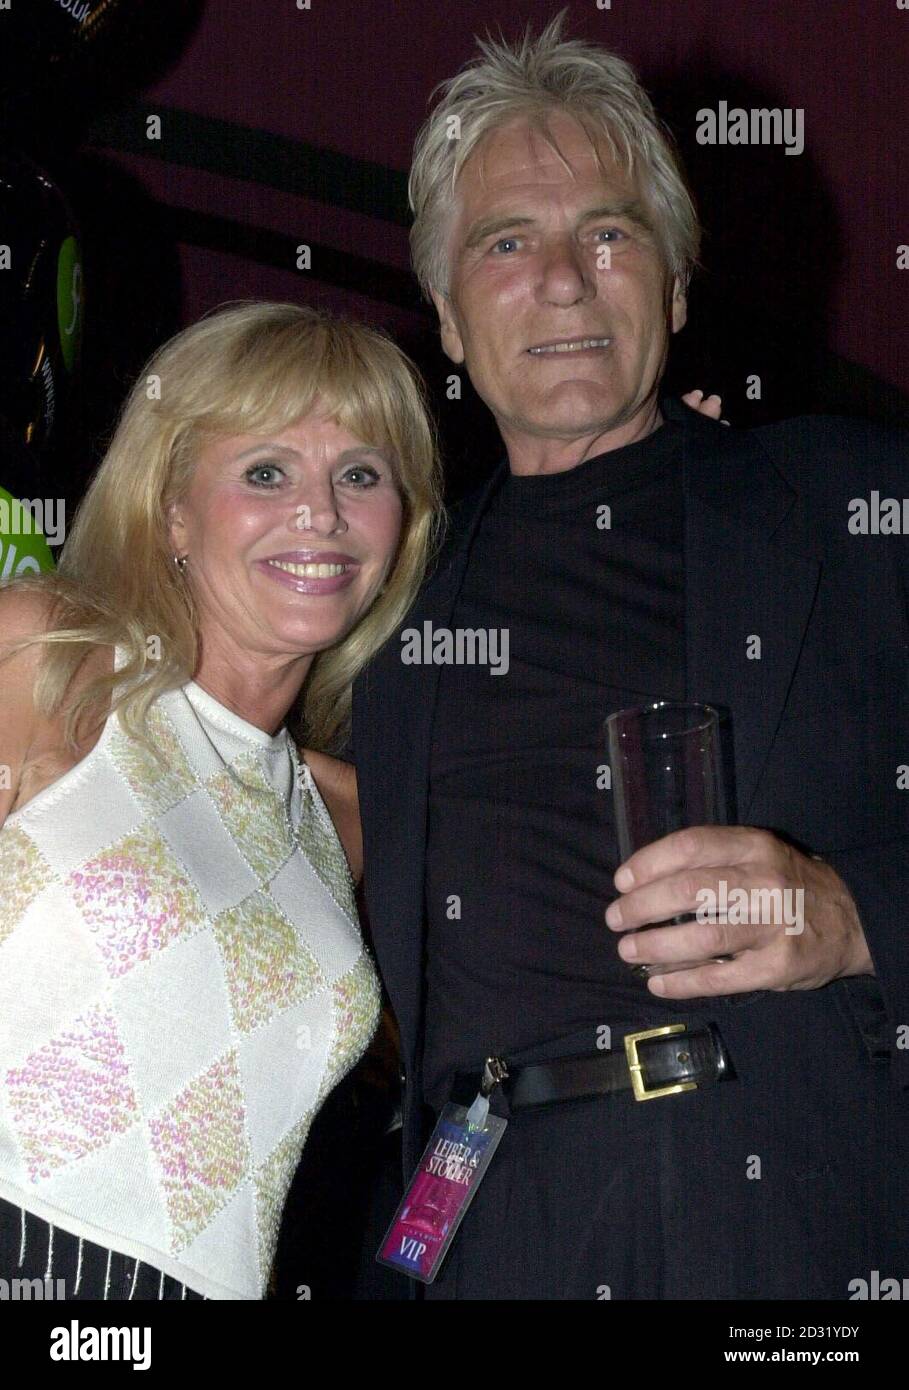 Actress Britt Ekland and actor and singer Adam Faith during a party in central London following a special all-star gala tribute to legendary songwriters Leiber and Stoller at the Hammersmith Apollo in London. Stock Photo